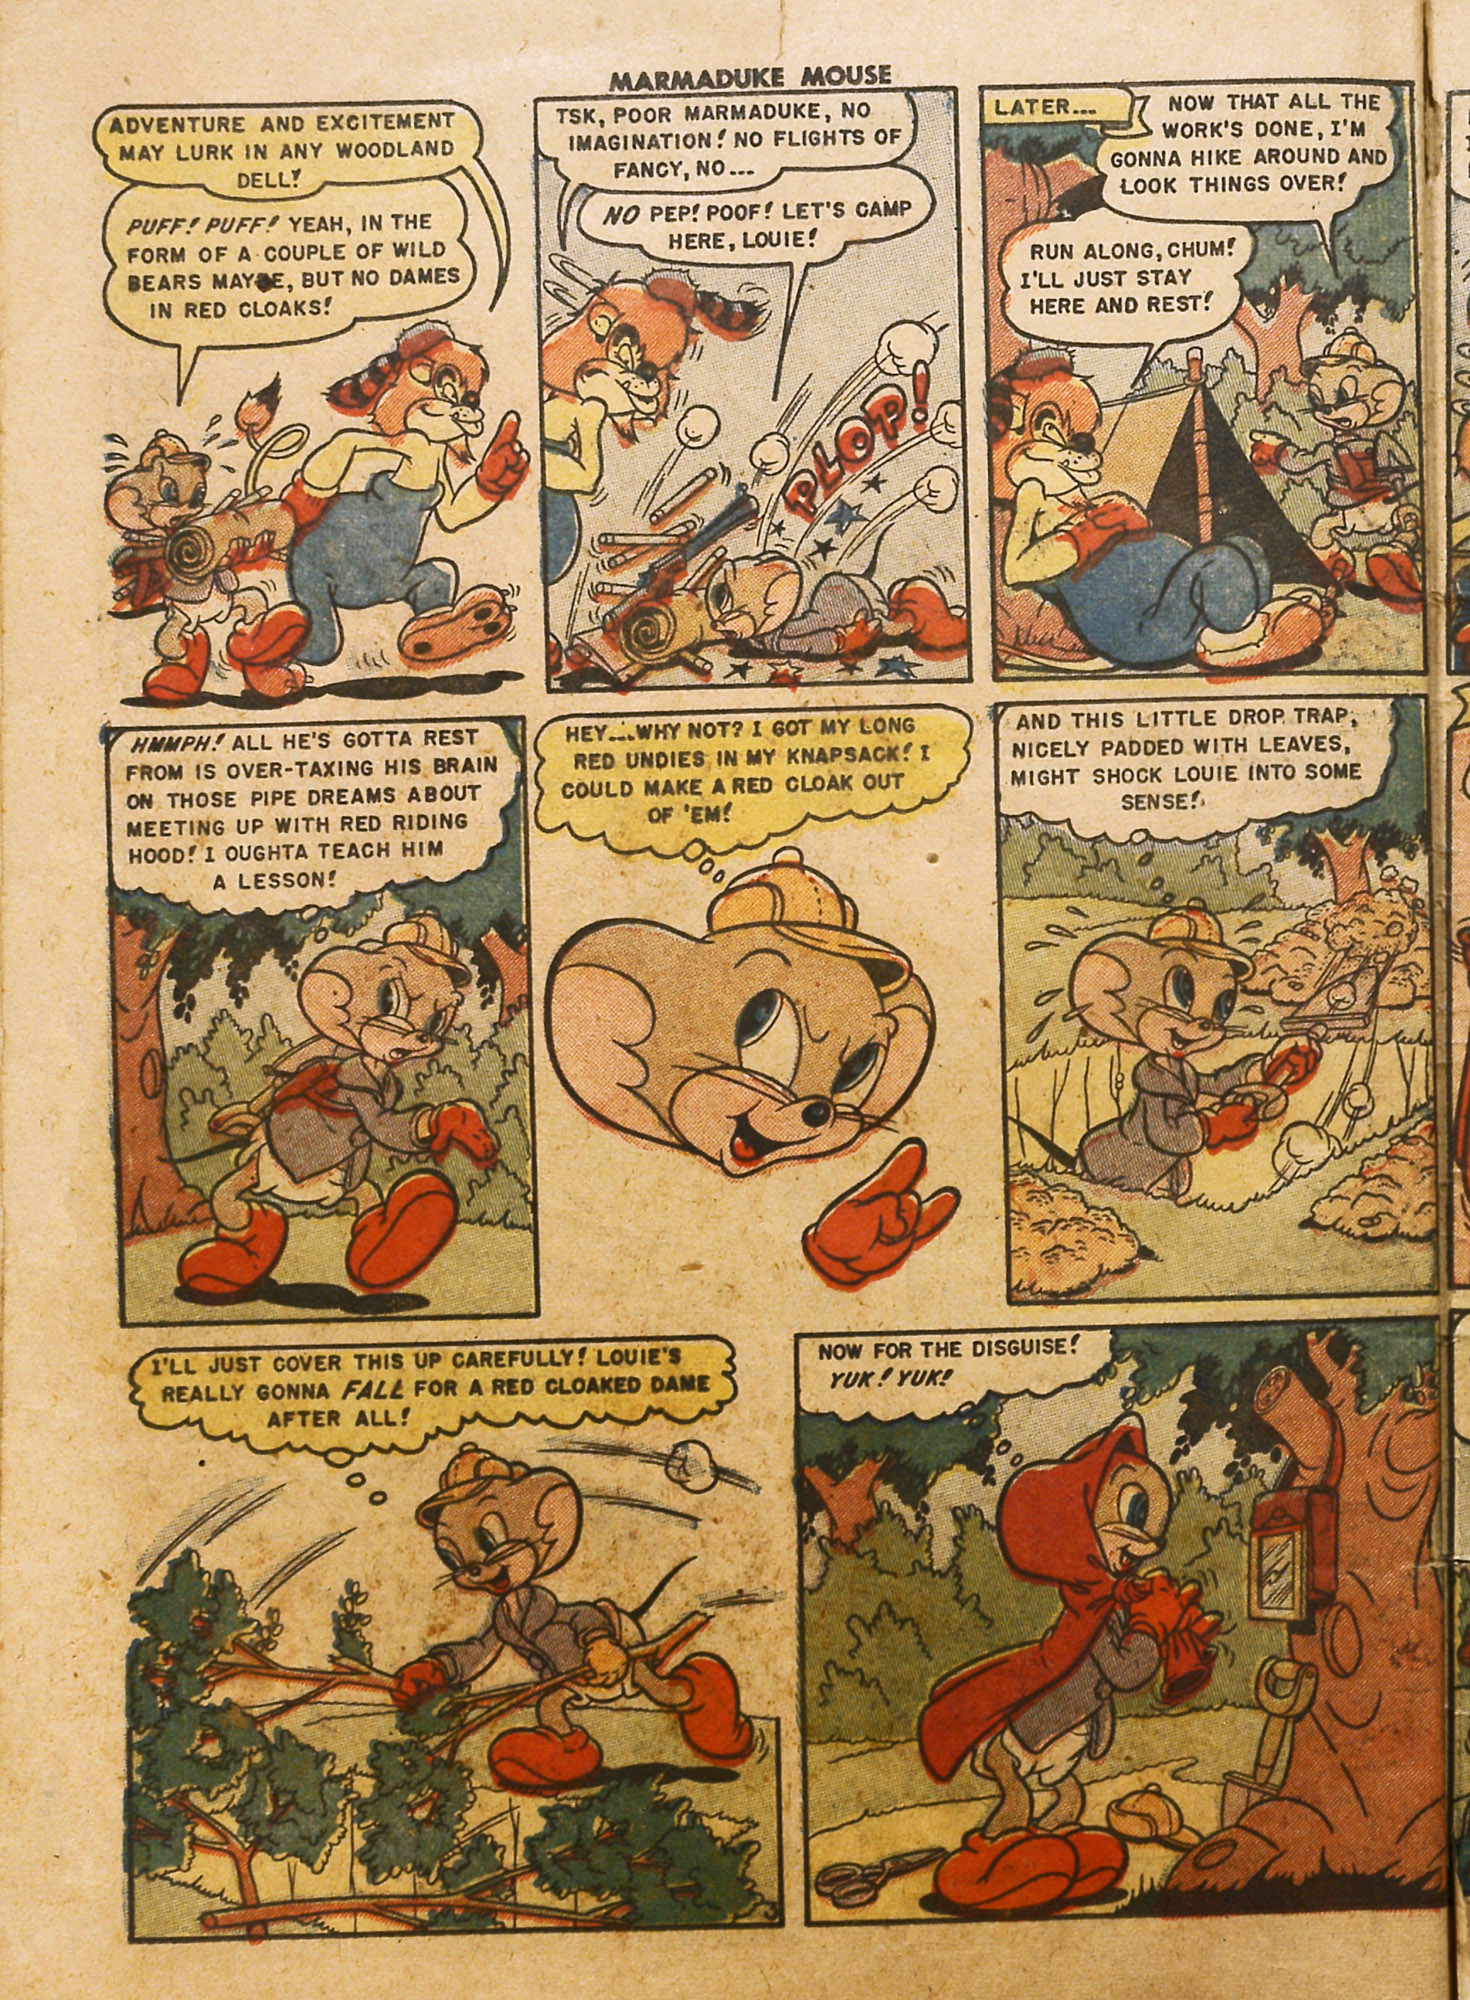 Read online Marmaduke Mouse comic -  Issue #19 - 26